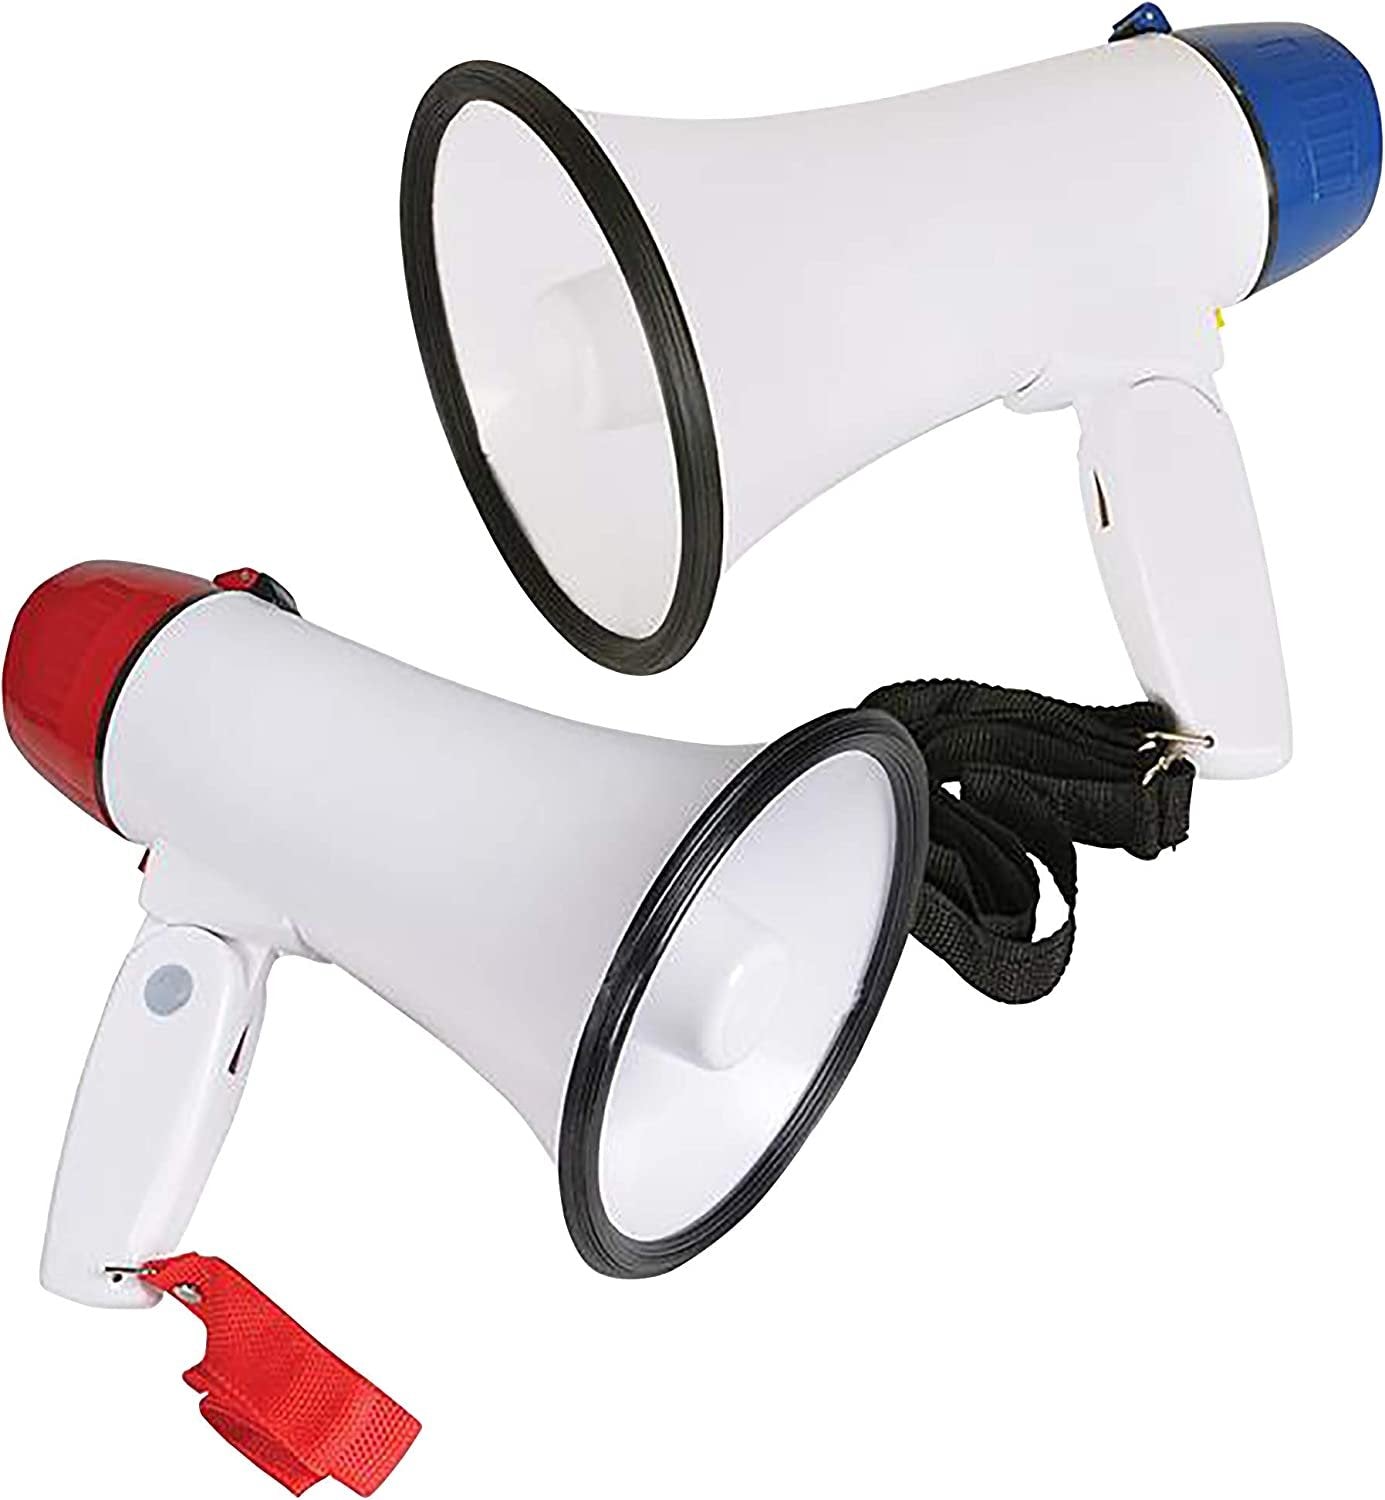 Battery-Operated Megaphone - Set of 2 - Portable Mega Phone Loud Speaker with Siren, Volume Control and Hanging Strap - Great Prize for Kids and Adults - Blue and Red